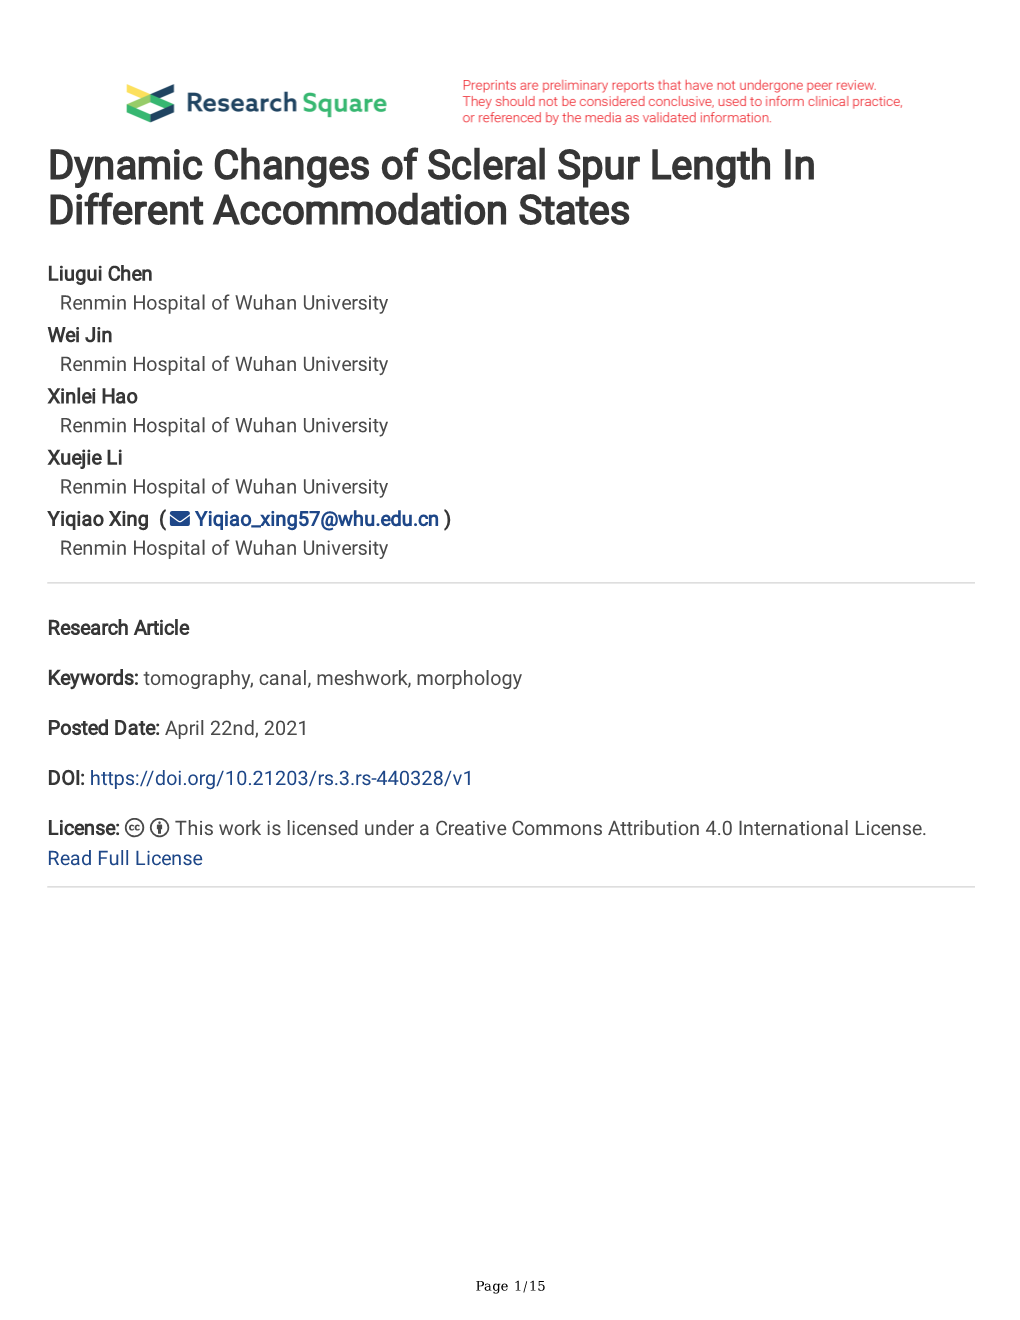 Dynamic Changes of Scleral Spur Length in Different Accommodation States